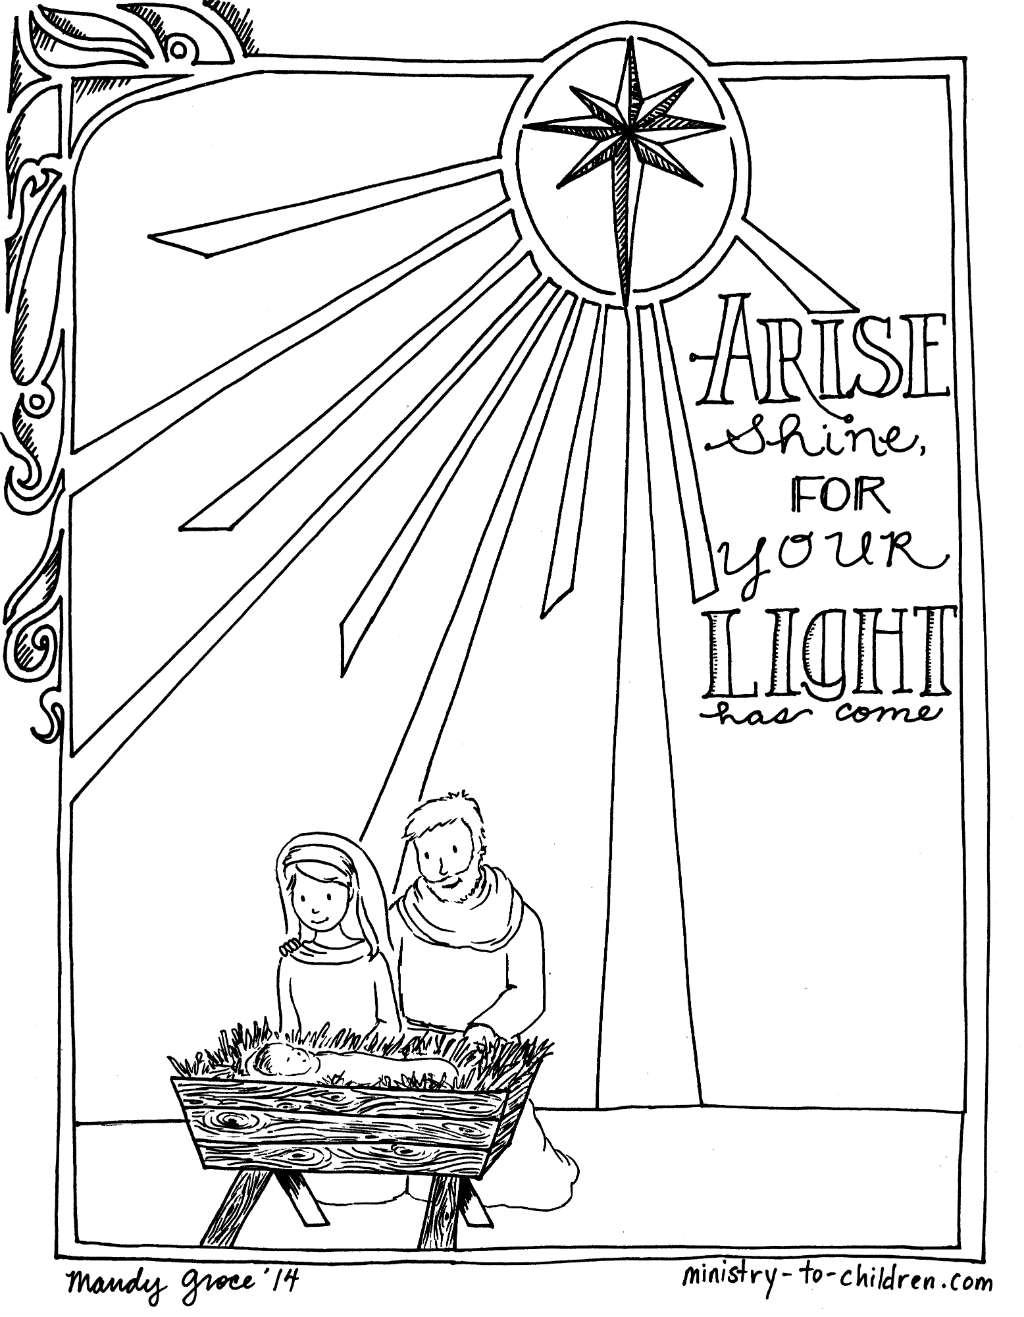 Free Advent Coloring Pages Arise Shine for Your Light printable